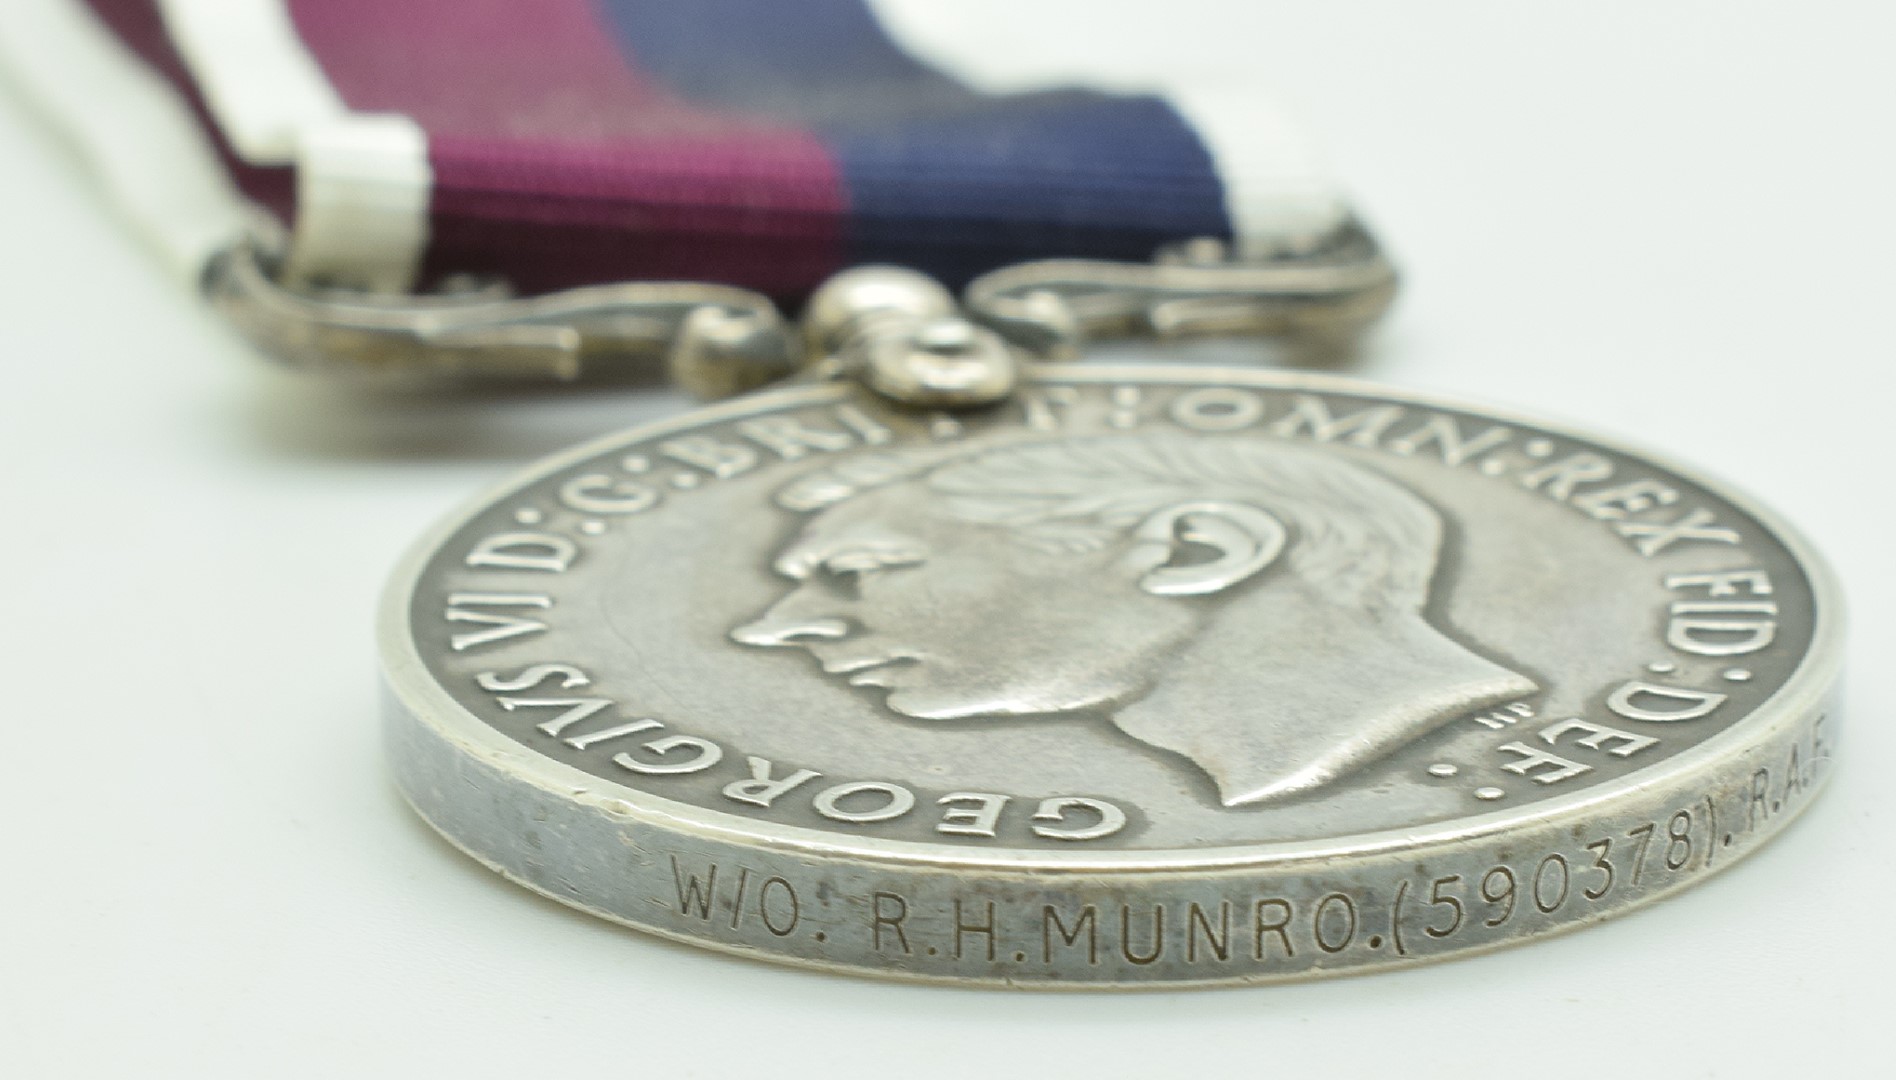 Royal Air Force Long Service and Good Conduct Medal named to Warrant Officer R H Munro 590378 RAF - Image 4 of 5